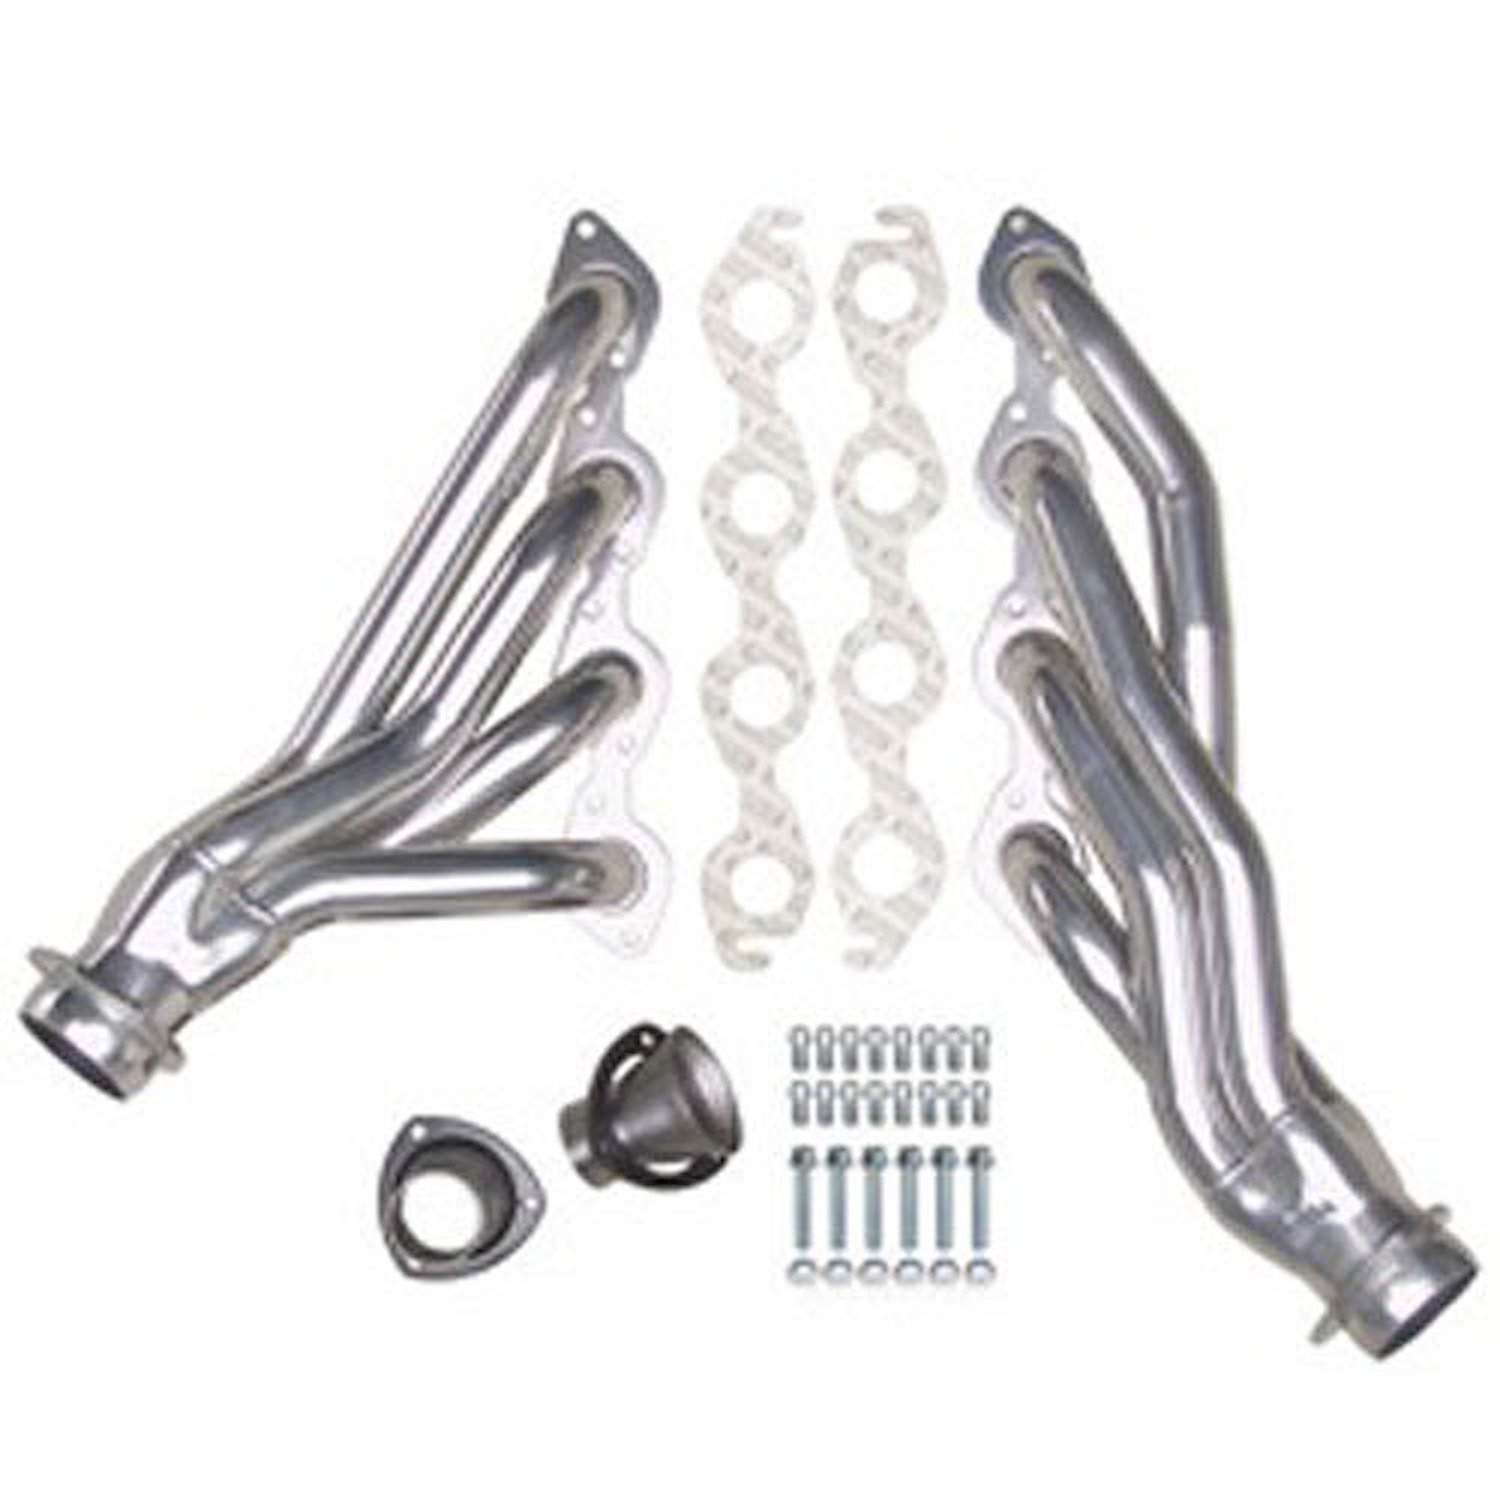 Standard Duty HTC Coated Shorty Headers 1965-81 Chevy